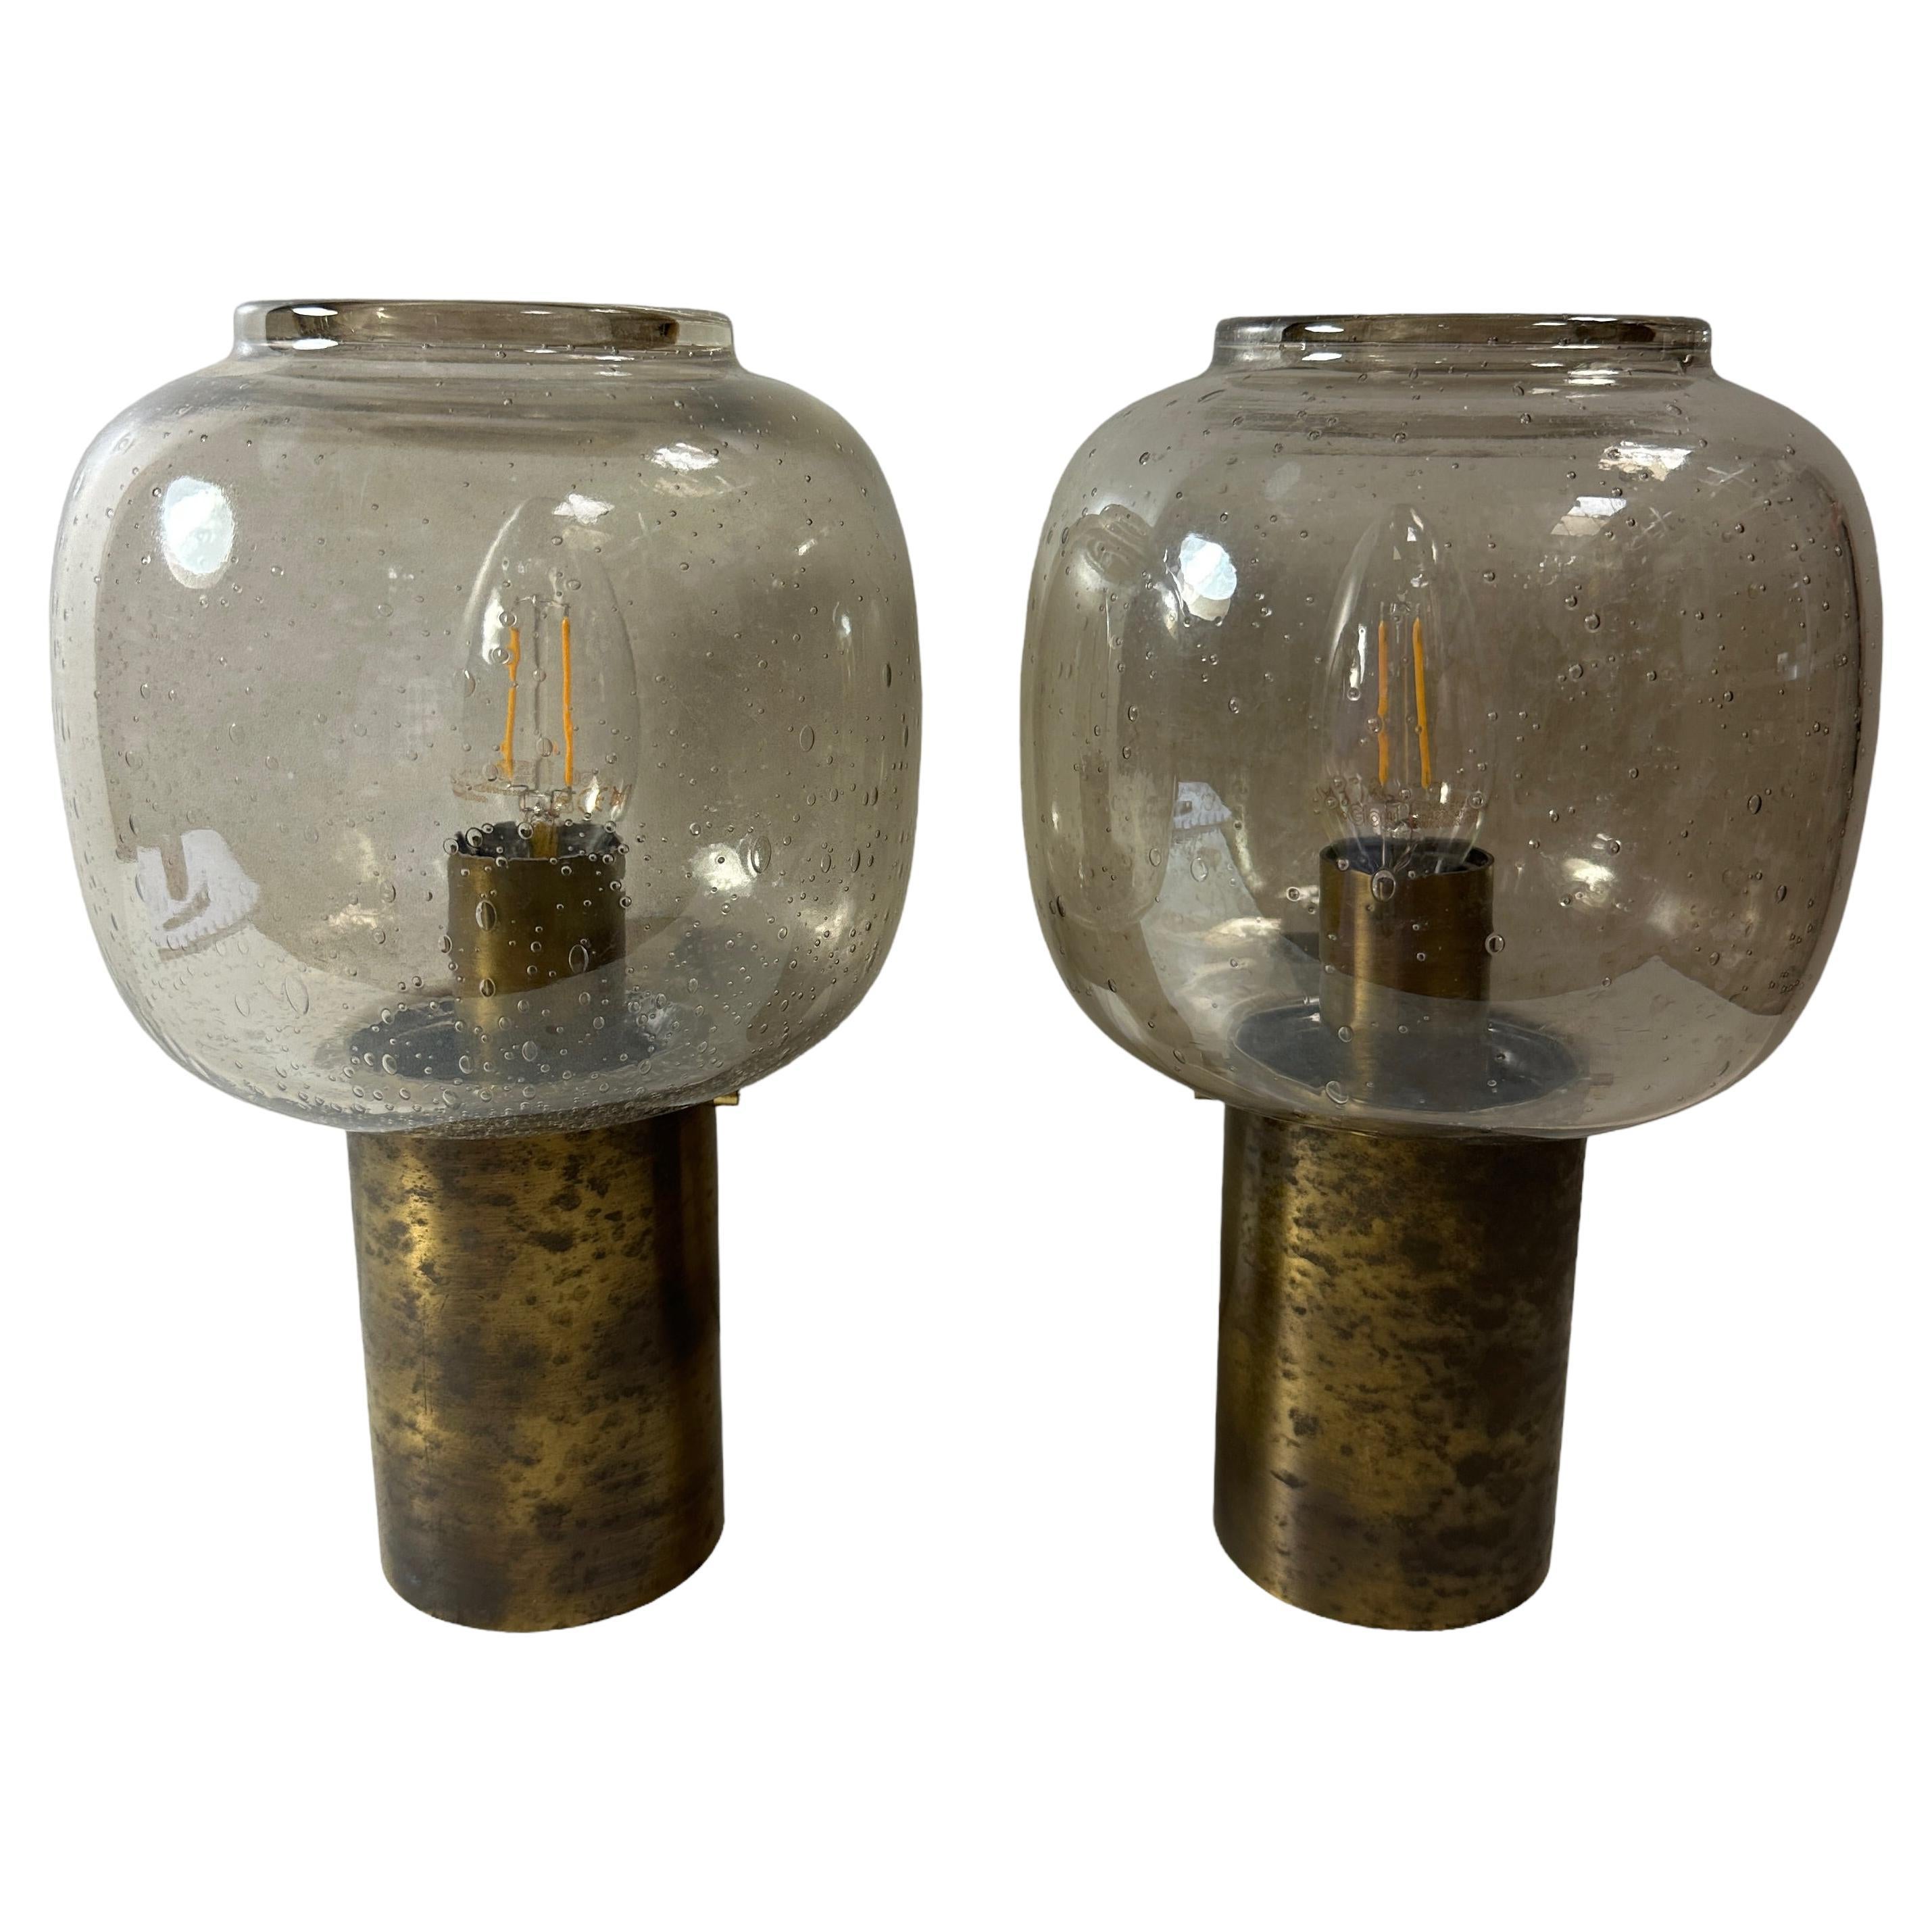 Pair of 1960s Wall Sconces in the Style of Hans - Agne Jakobsson, Skandinavia For Sale